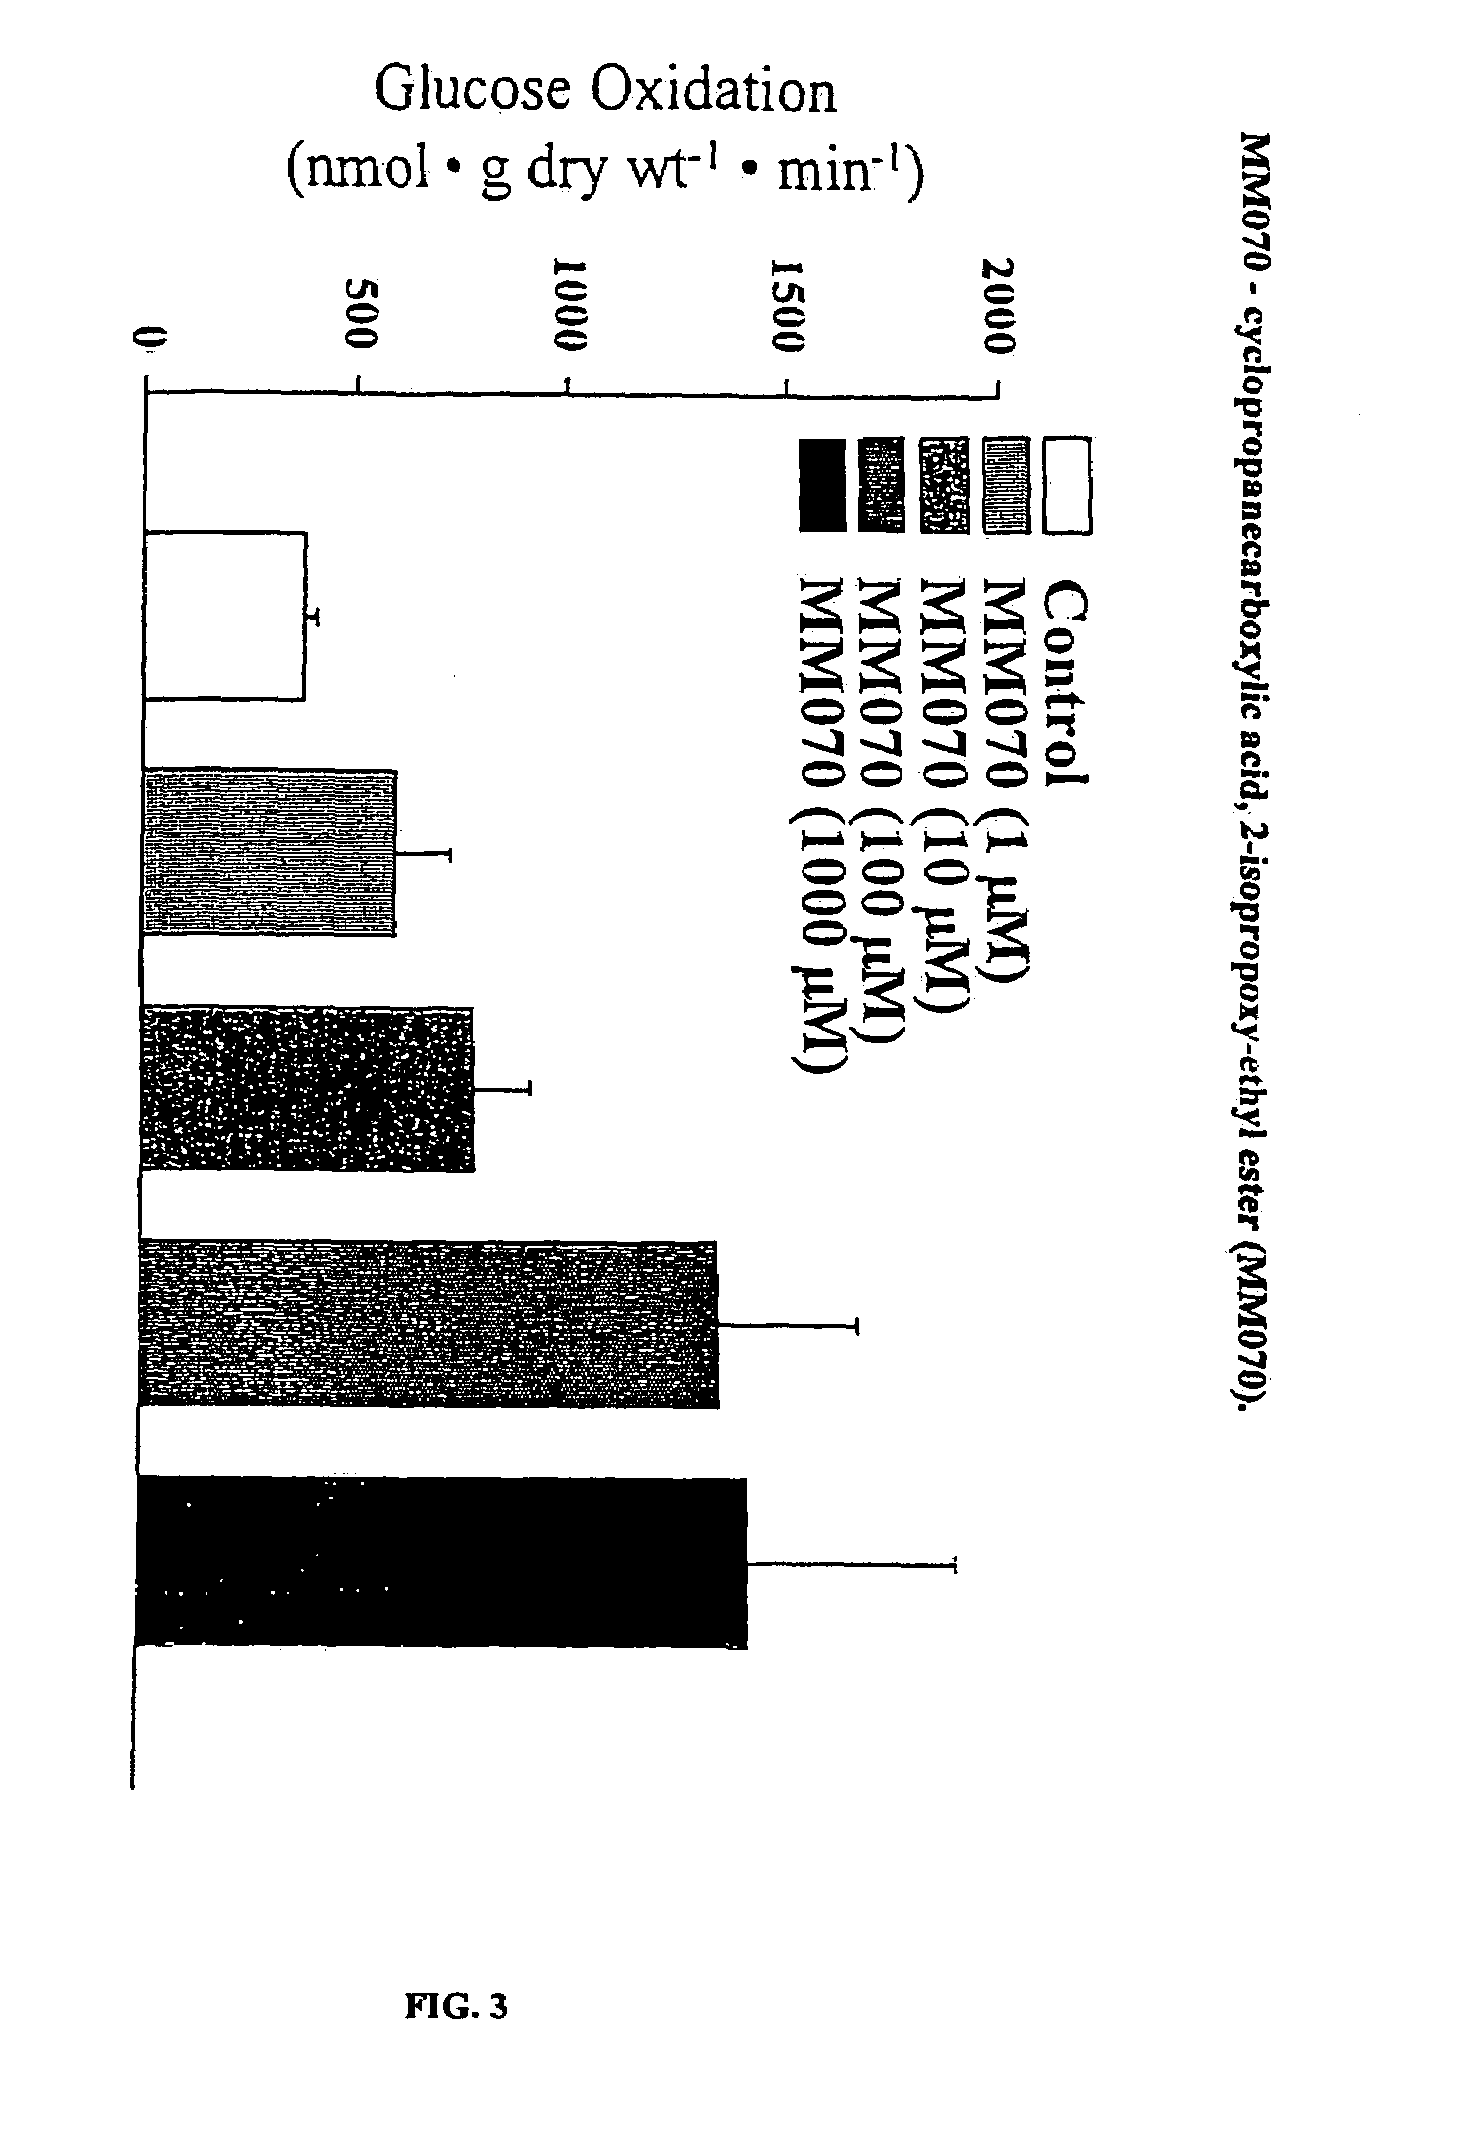 Compounds that stimulate glucose utilization and methods of use